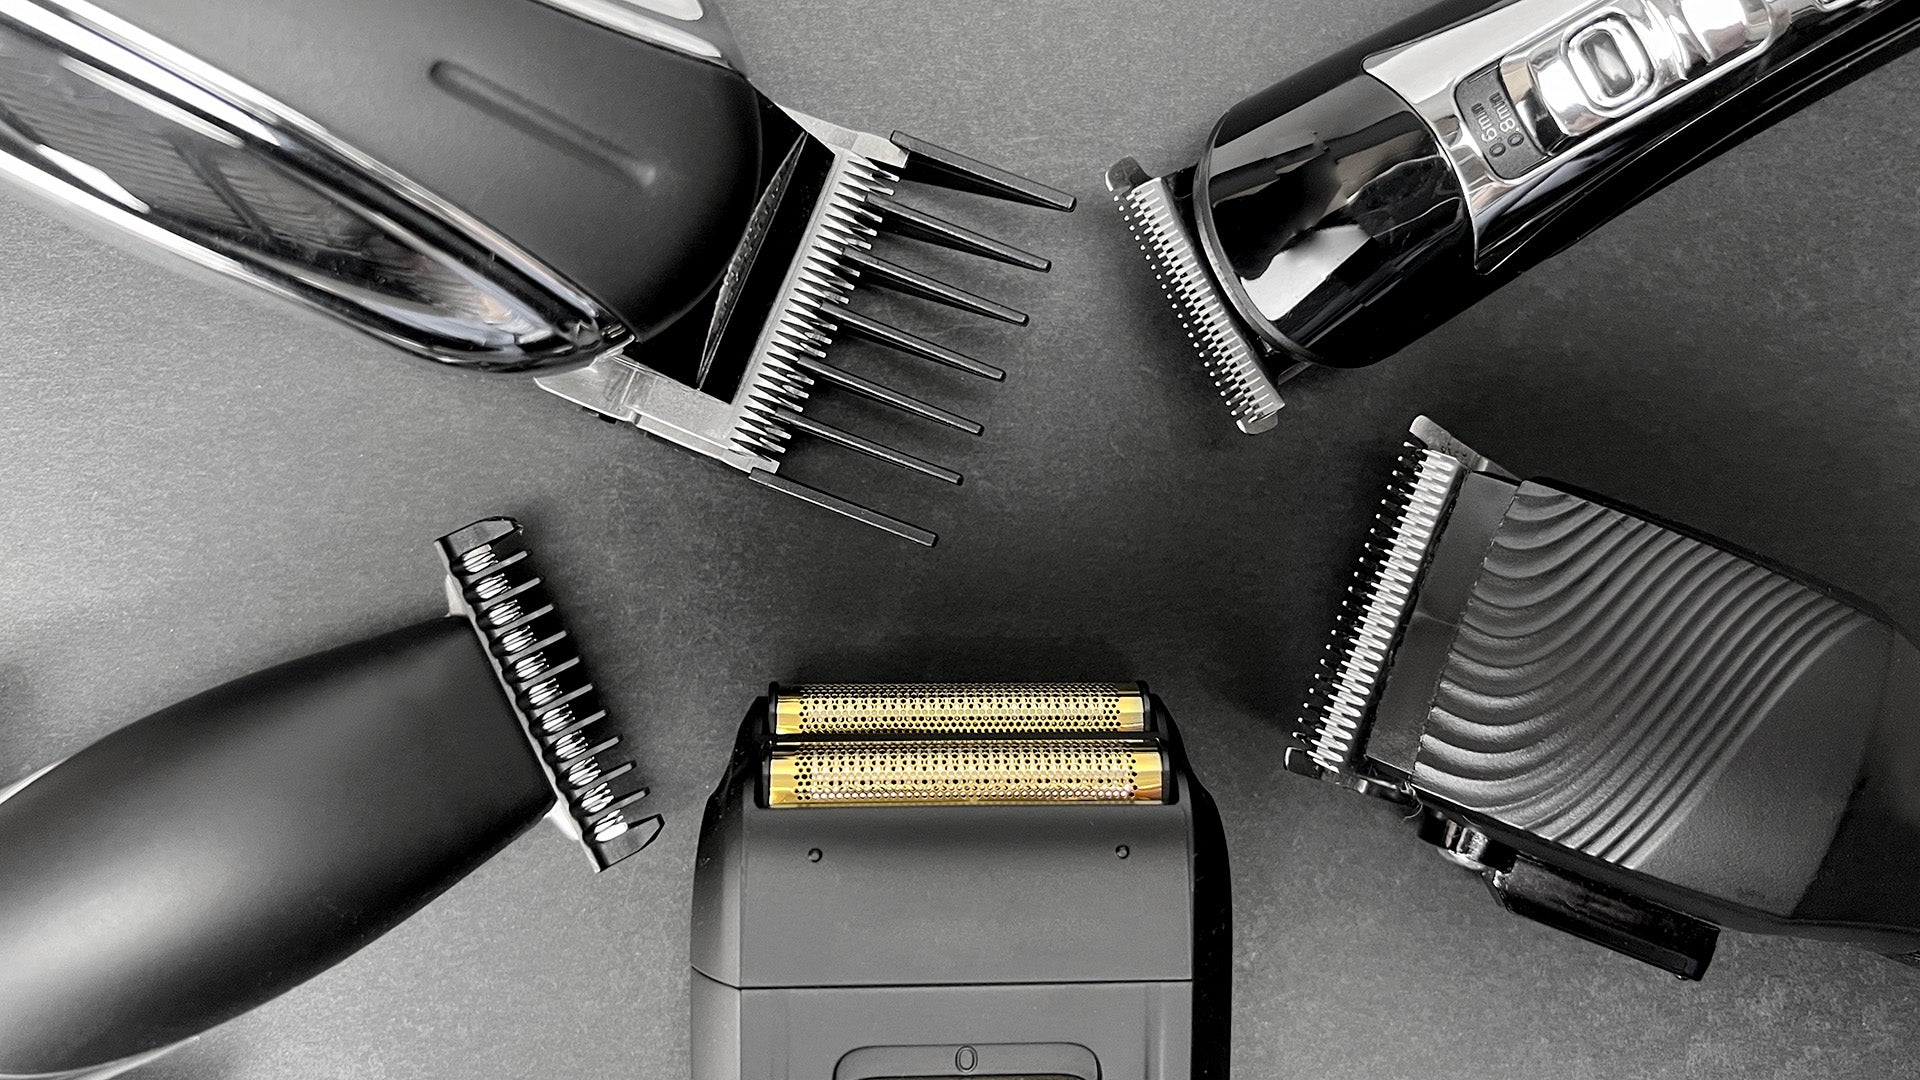 Hair clippers and trimmers and a foil shaver all pointing inward, black and white with gold foil parts of the shaver